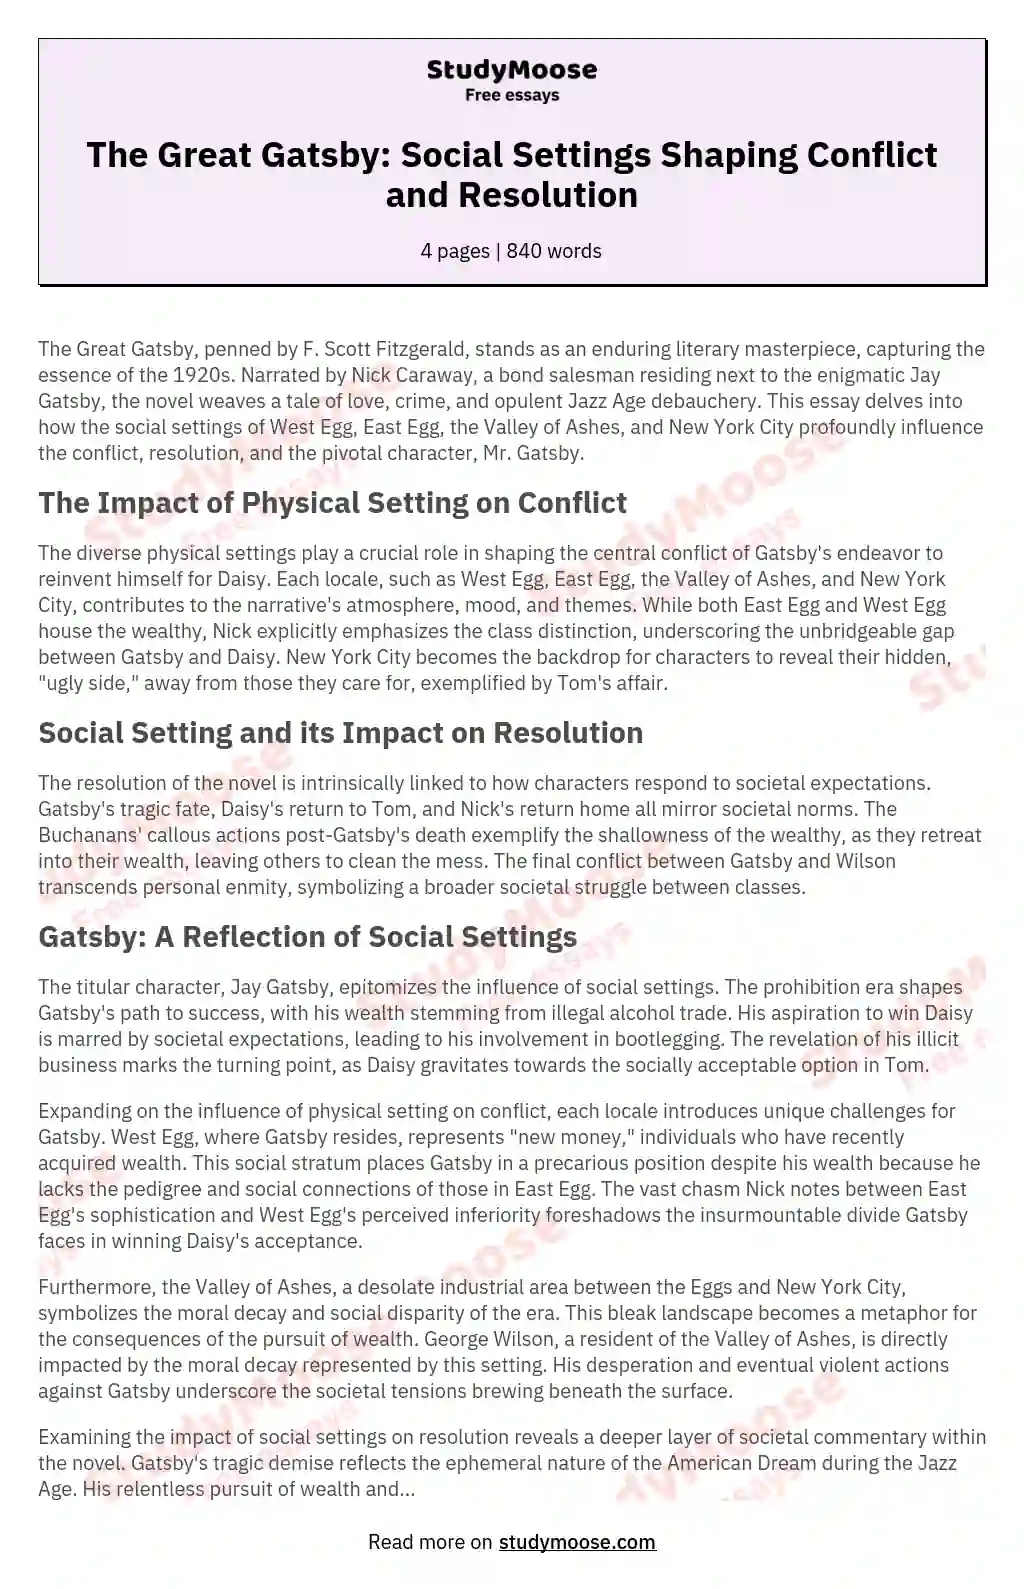 The Great Gatsby: Social Settings Shaping Conflict and Resolution essay